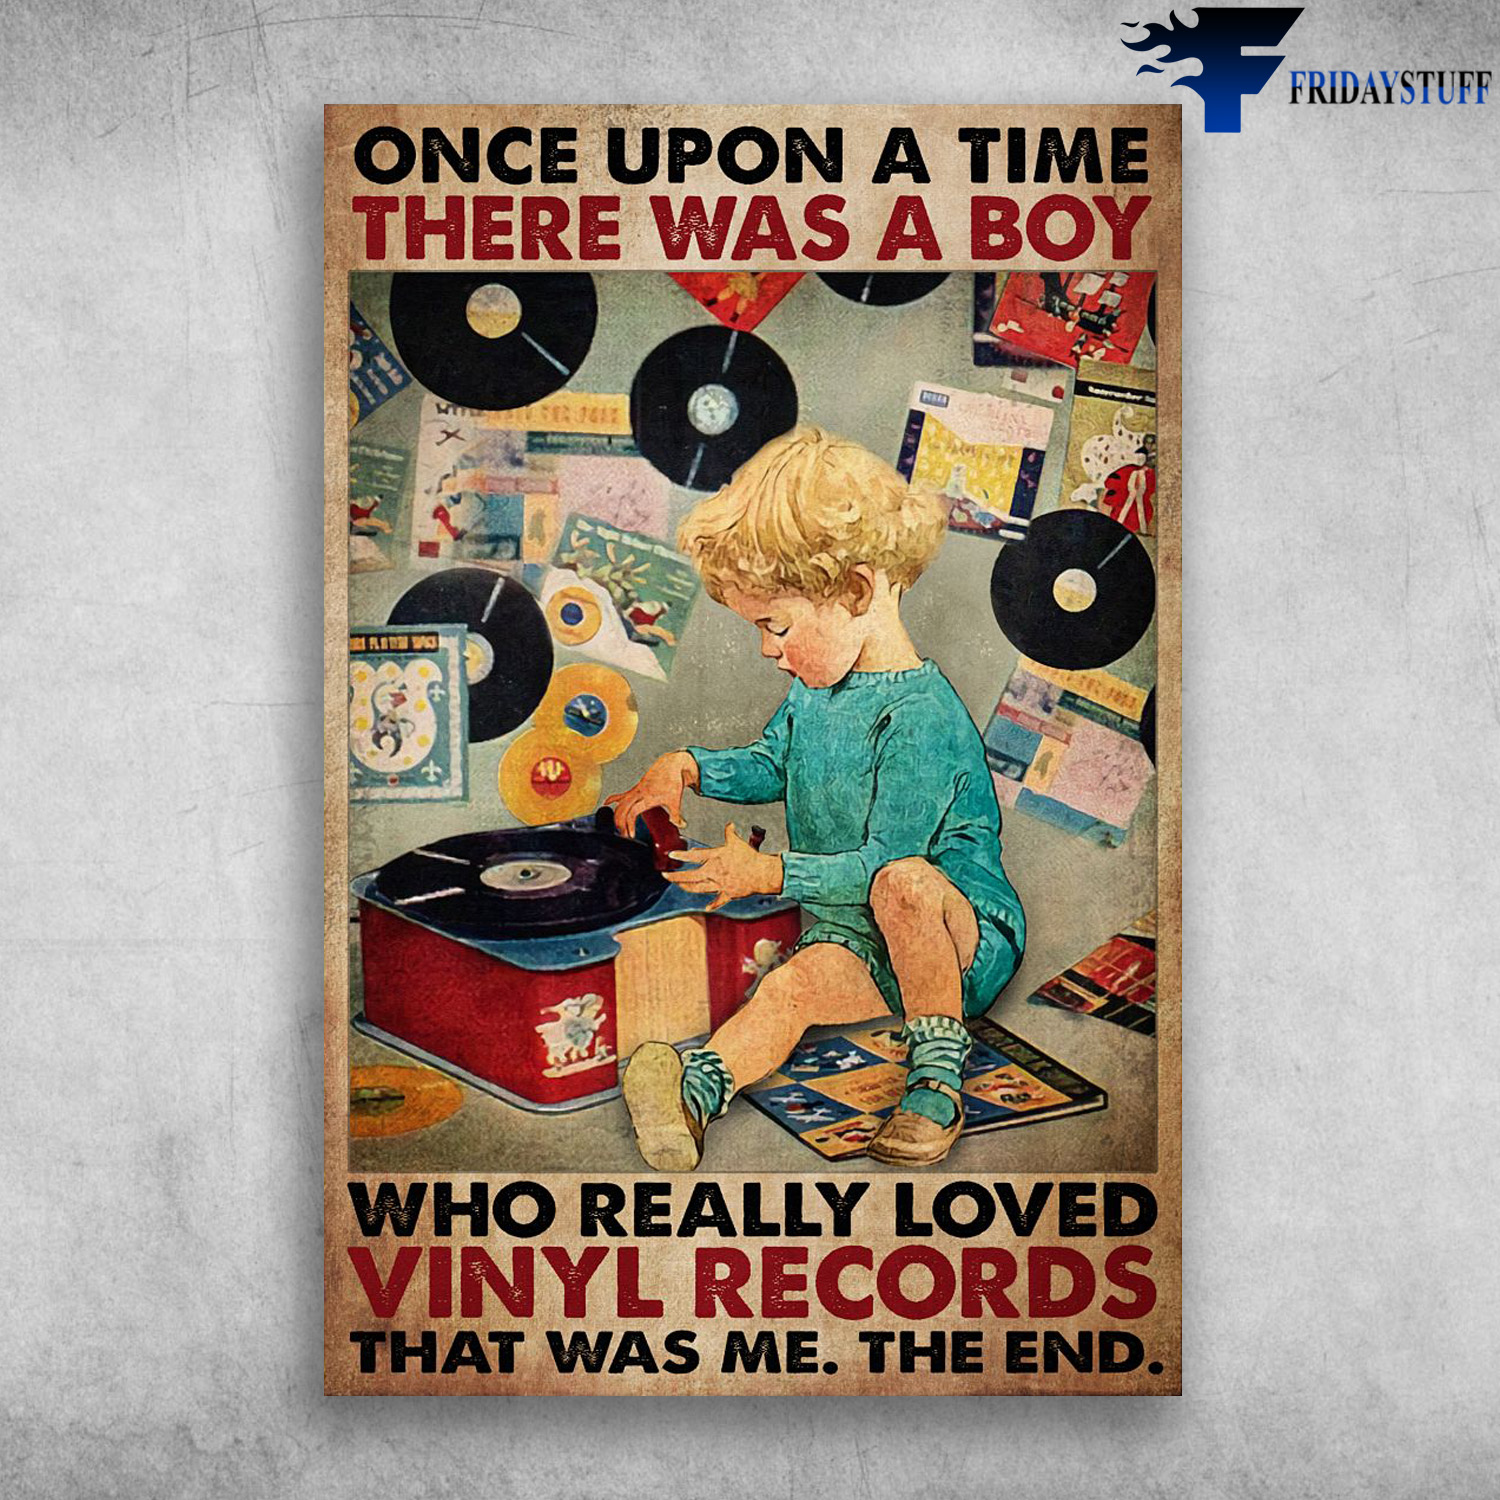 The Boy Loved Vinyl Records - Once Upon A Time There Was A Boy, Who Really Loved Vinyl Records, That Was Me, The End